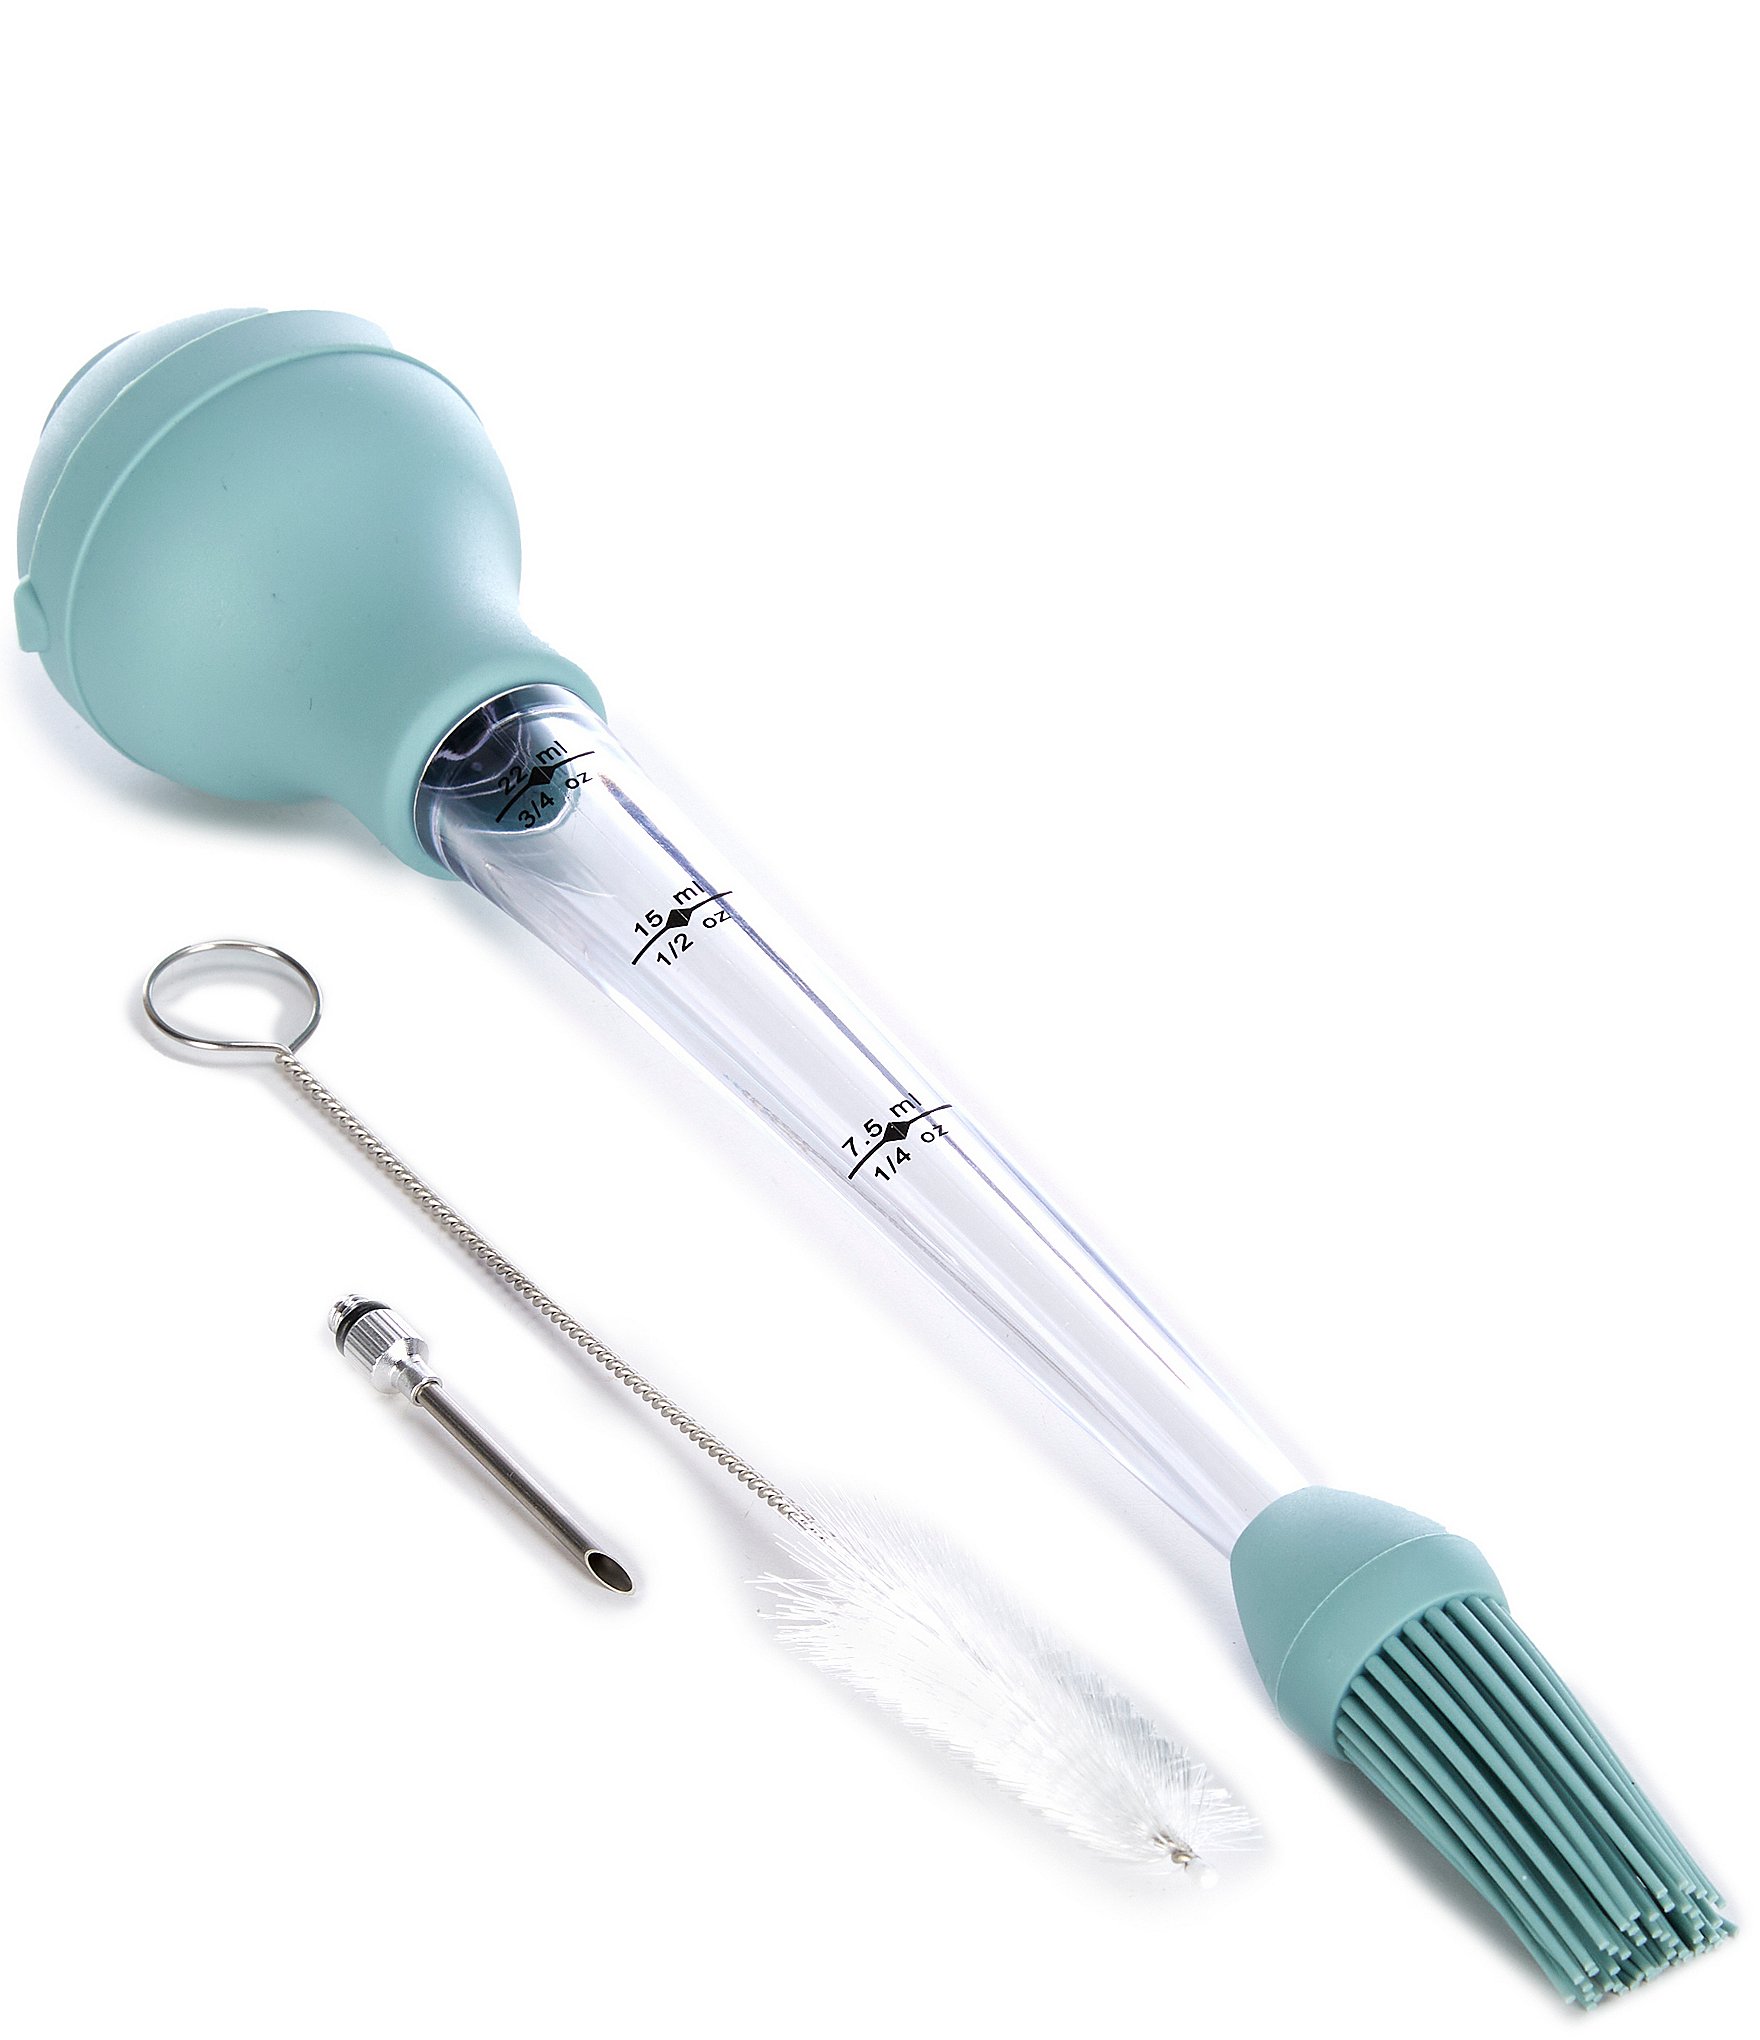 https://dimg.dillards.com/is/image/DillardsZoom/zoom/southern-living-silicone-2-in-1-baster-and-brush-set/00000000_zi_0965cf0e-0d7a-4a52-b44d-e937d0bdac6d.jpg